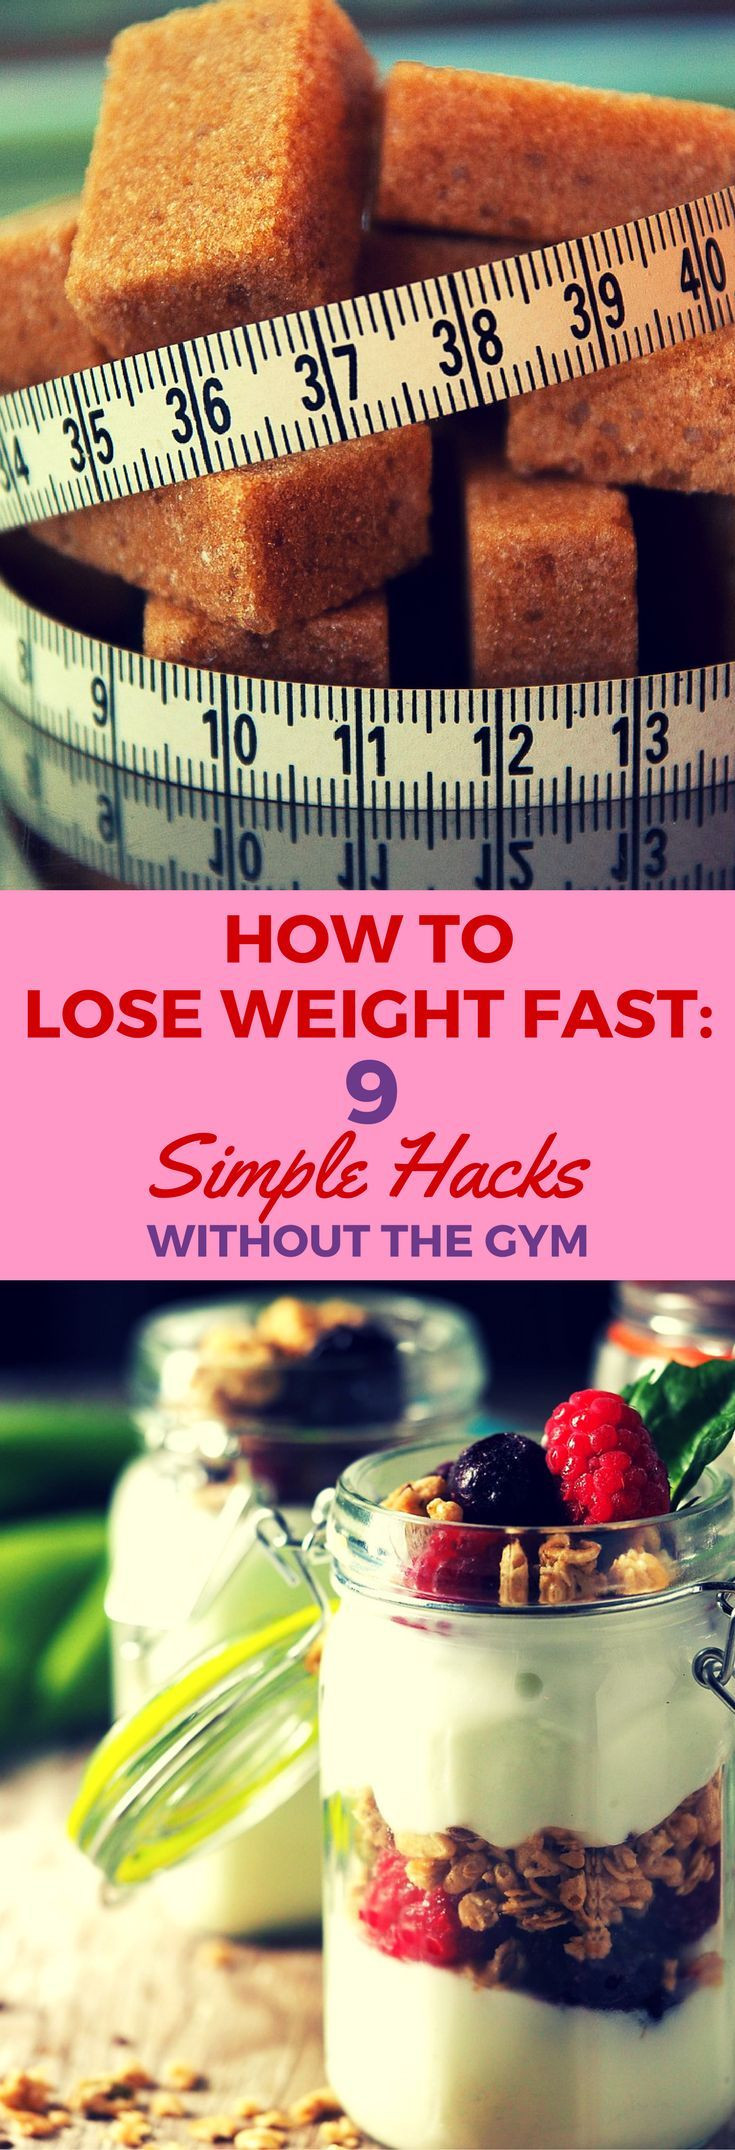 Quick Weight Loss Tricks
 Lose Weight Fast How to lose weight fast and easy with 9